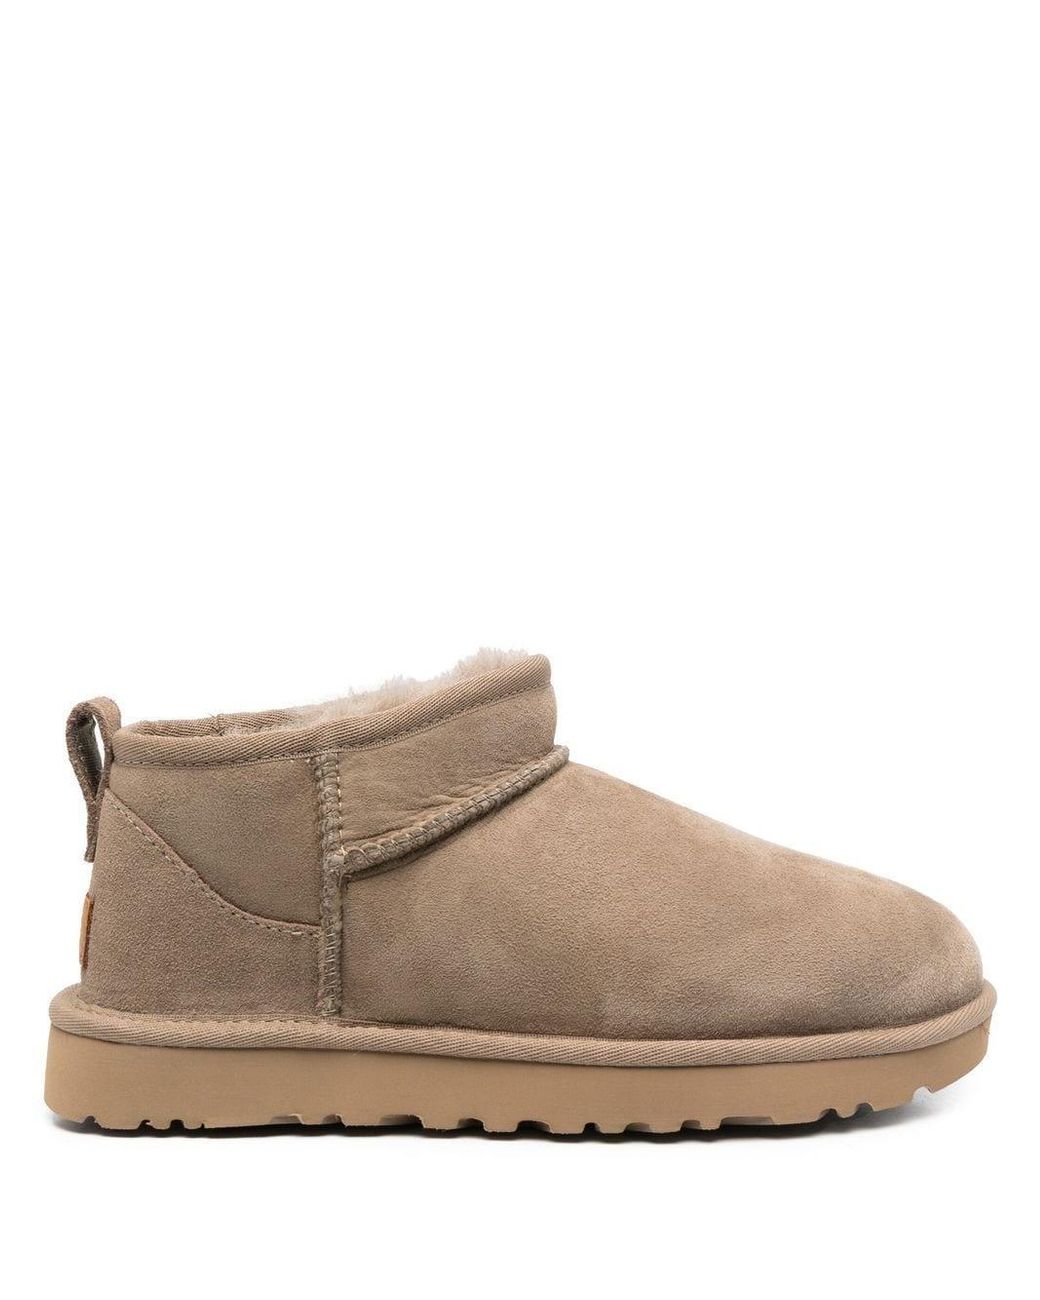 UGG Australia Boots Dove Grey in Brown | Lyst Canada